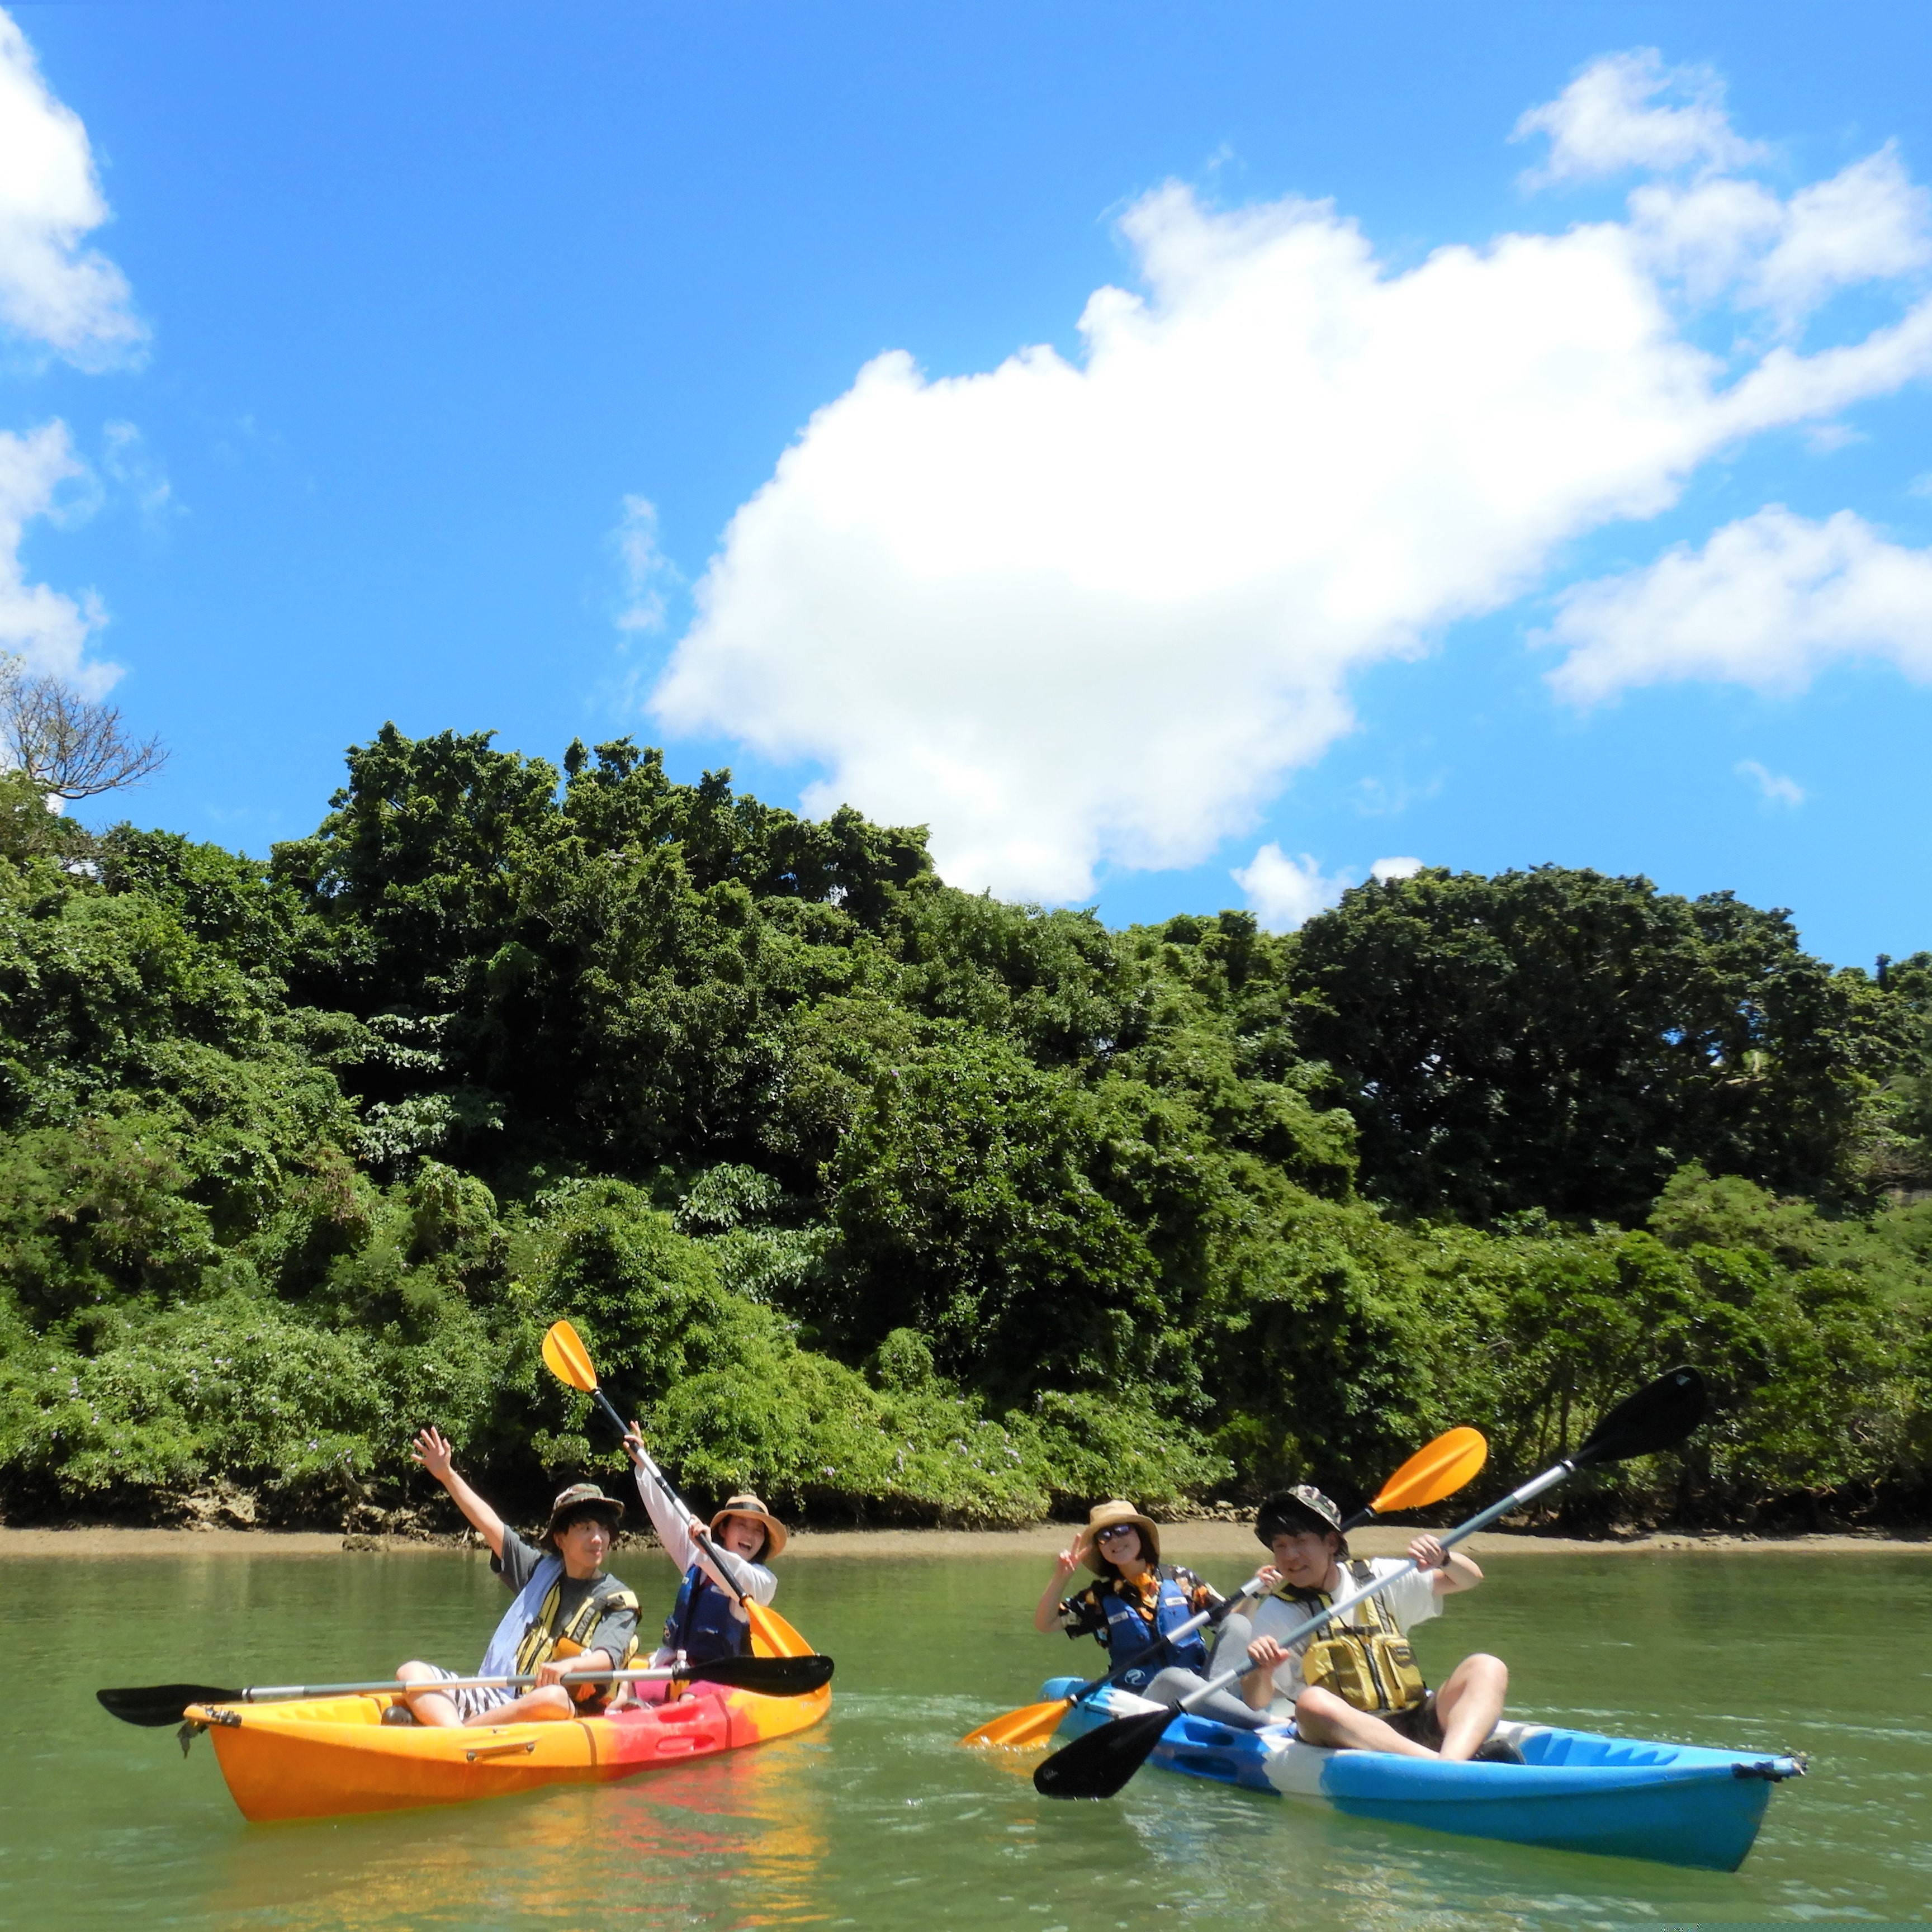 Mangrove Kayak Tour. Good Deal for 4 people or more♪ Easy access, held in the central area of Okinawa【Group discount】